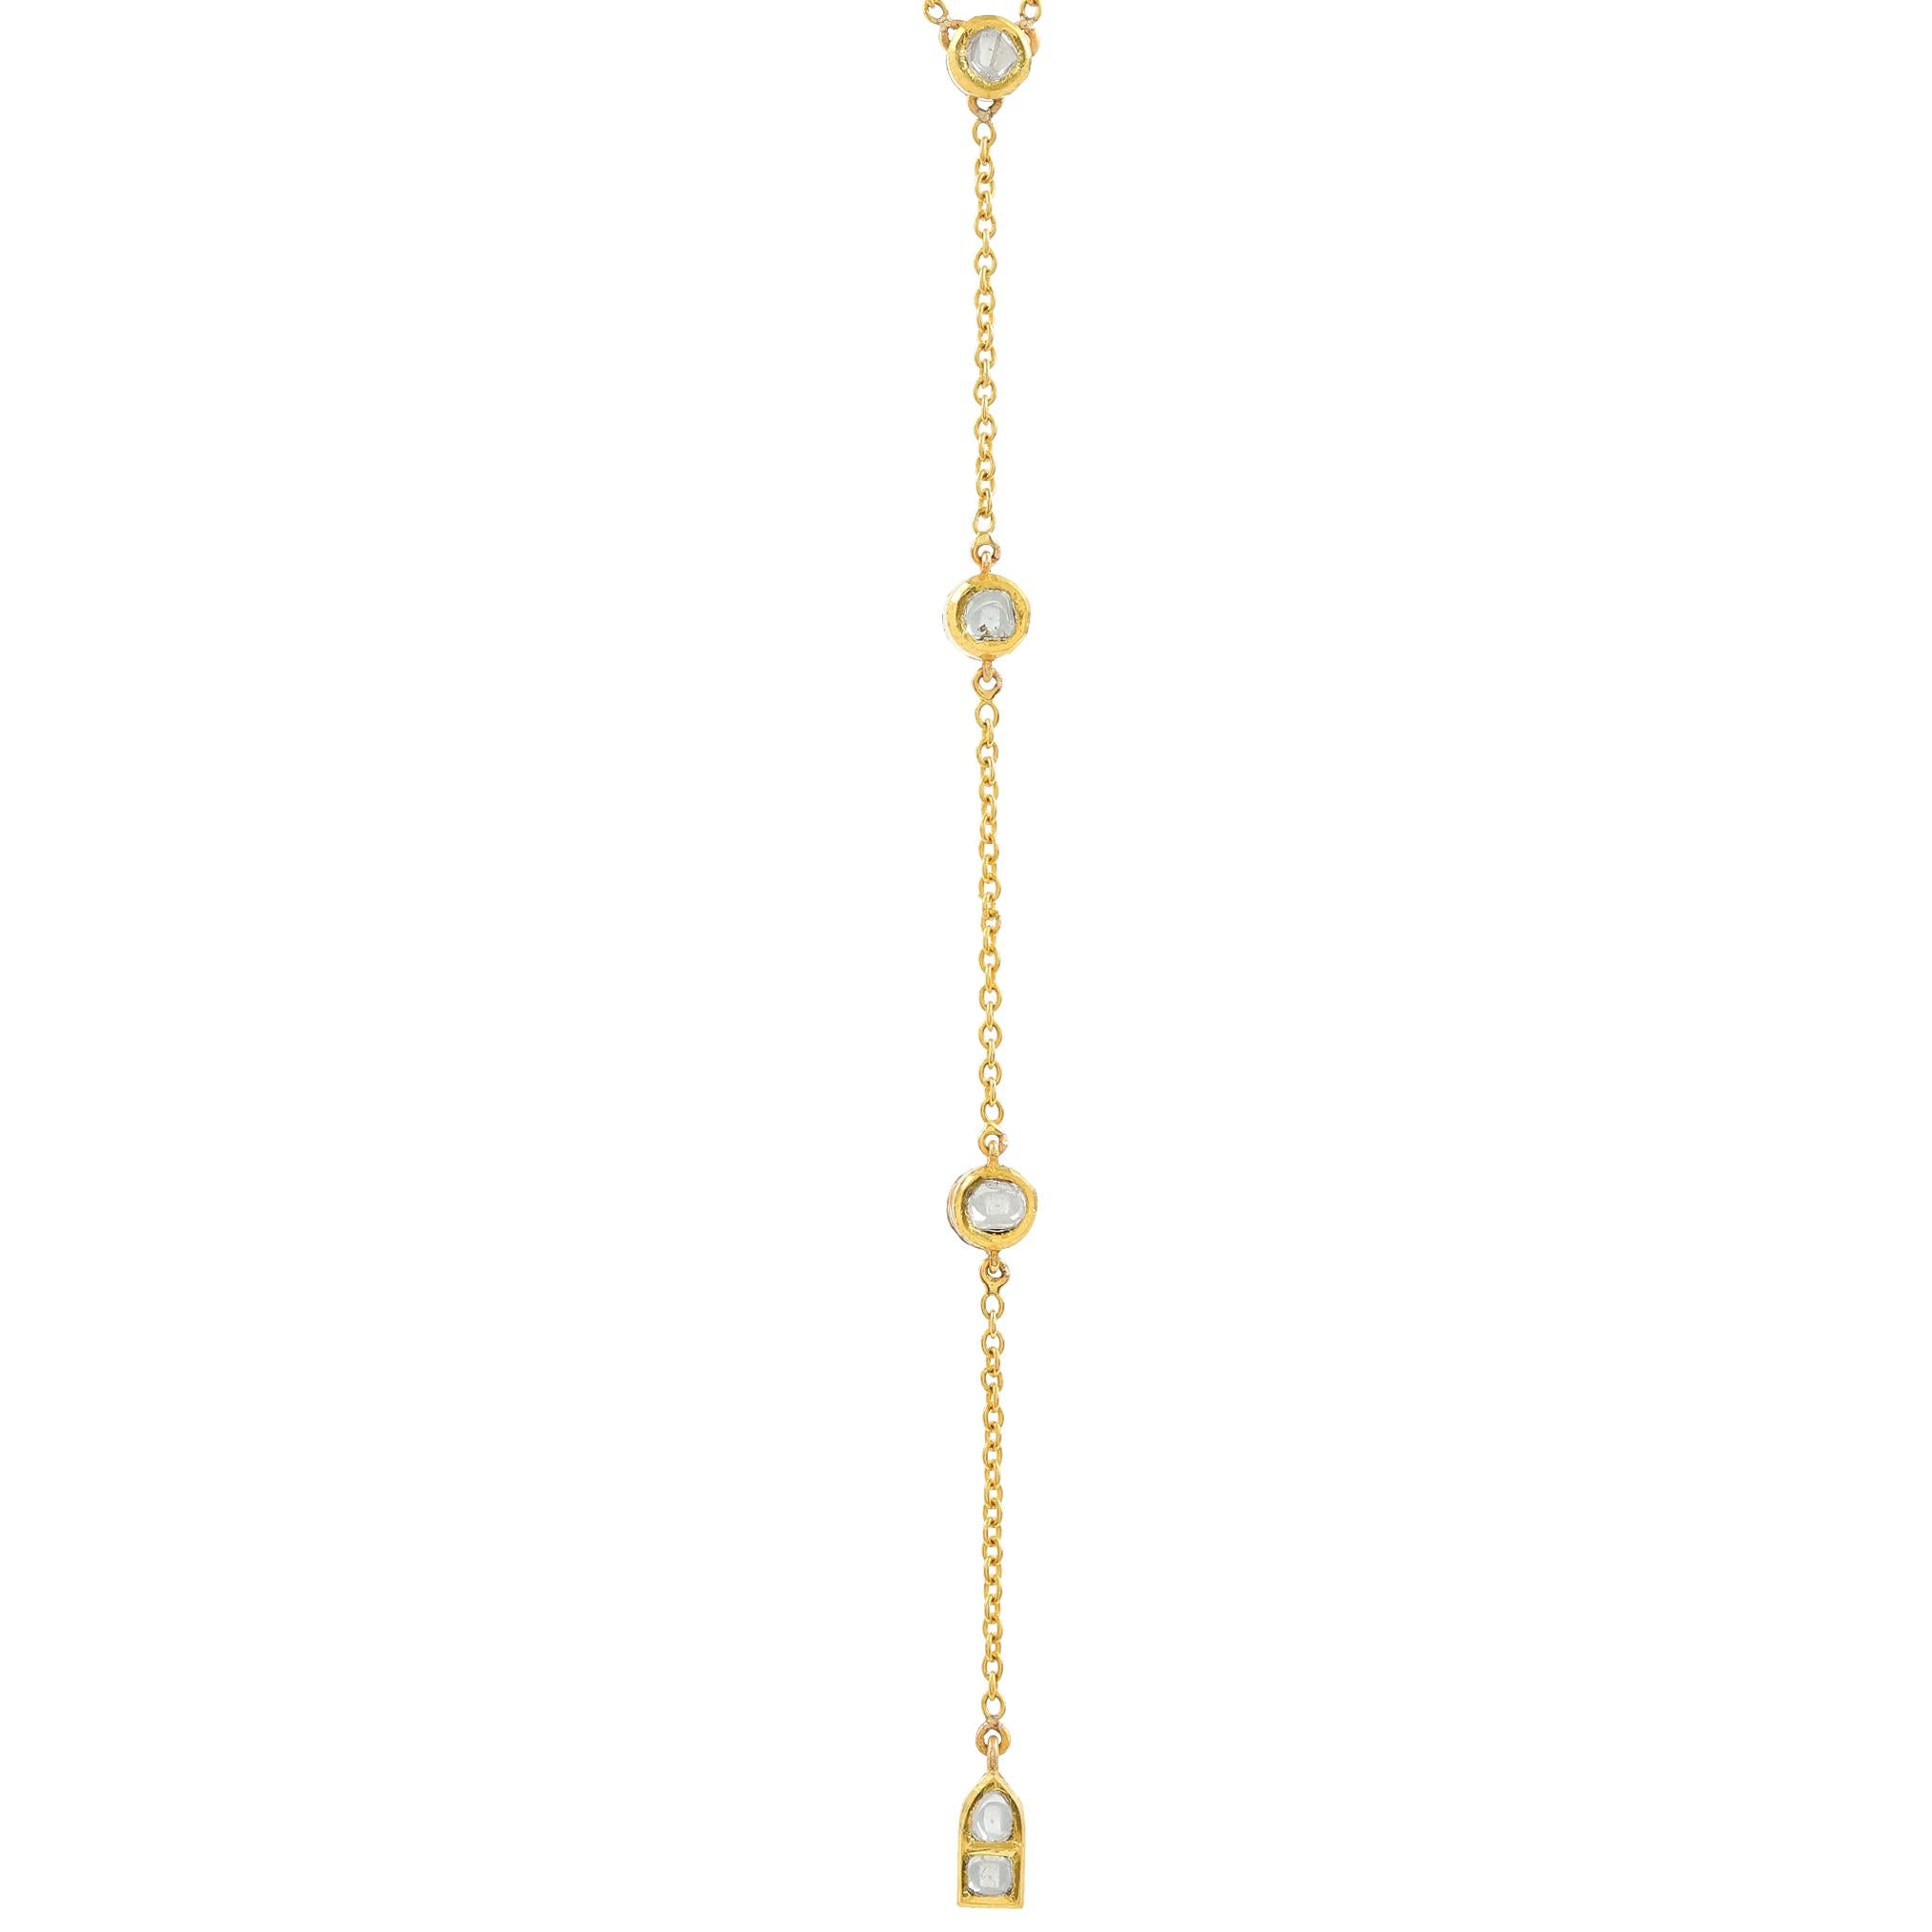 Behold the exquisite Tie Drop Necklace. Featuring Polki Diamonds (Uncut Diamonds) in the embrace of 18 Karat Yellow Gold. It is artistically crafted to bring out the shine of the Polki Diamonds (Uncut Diamonds) either way it is worn. Like beautiful